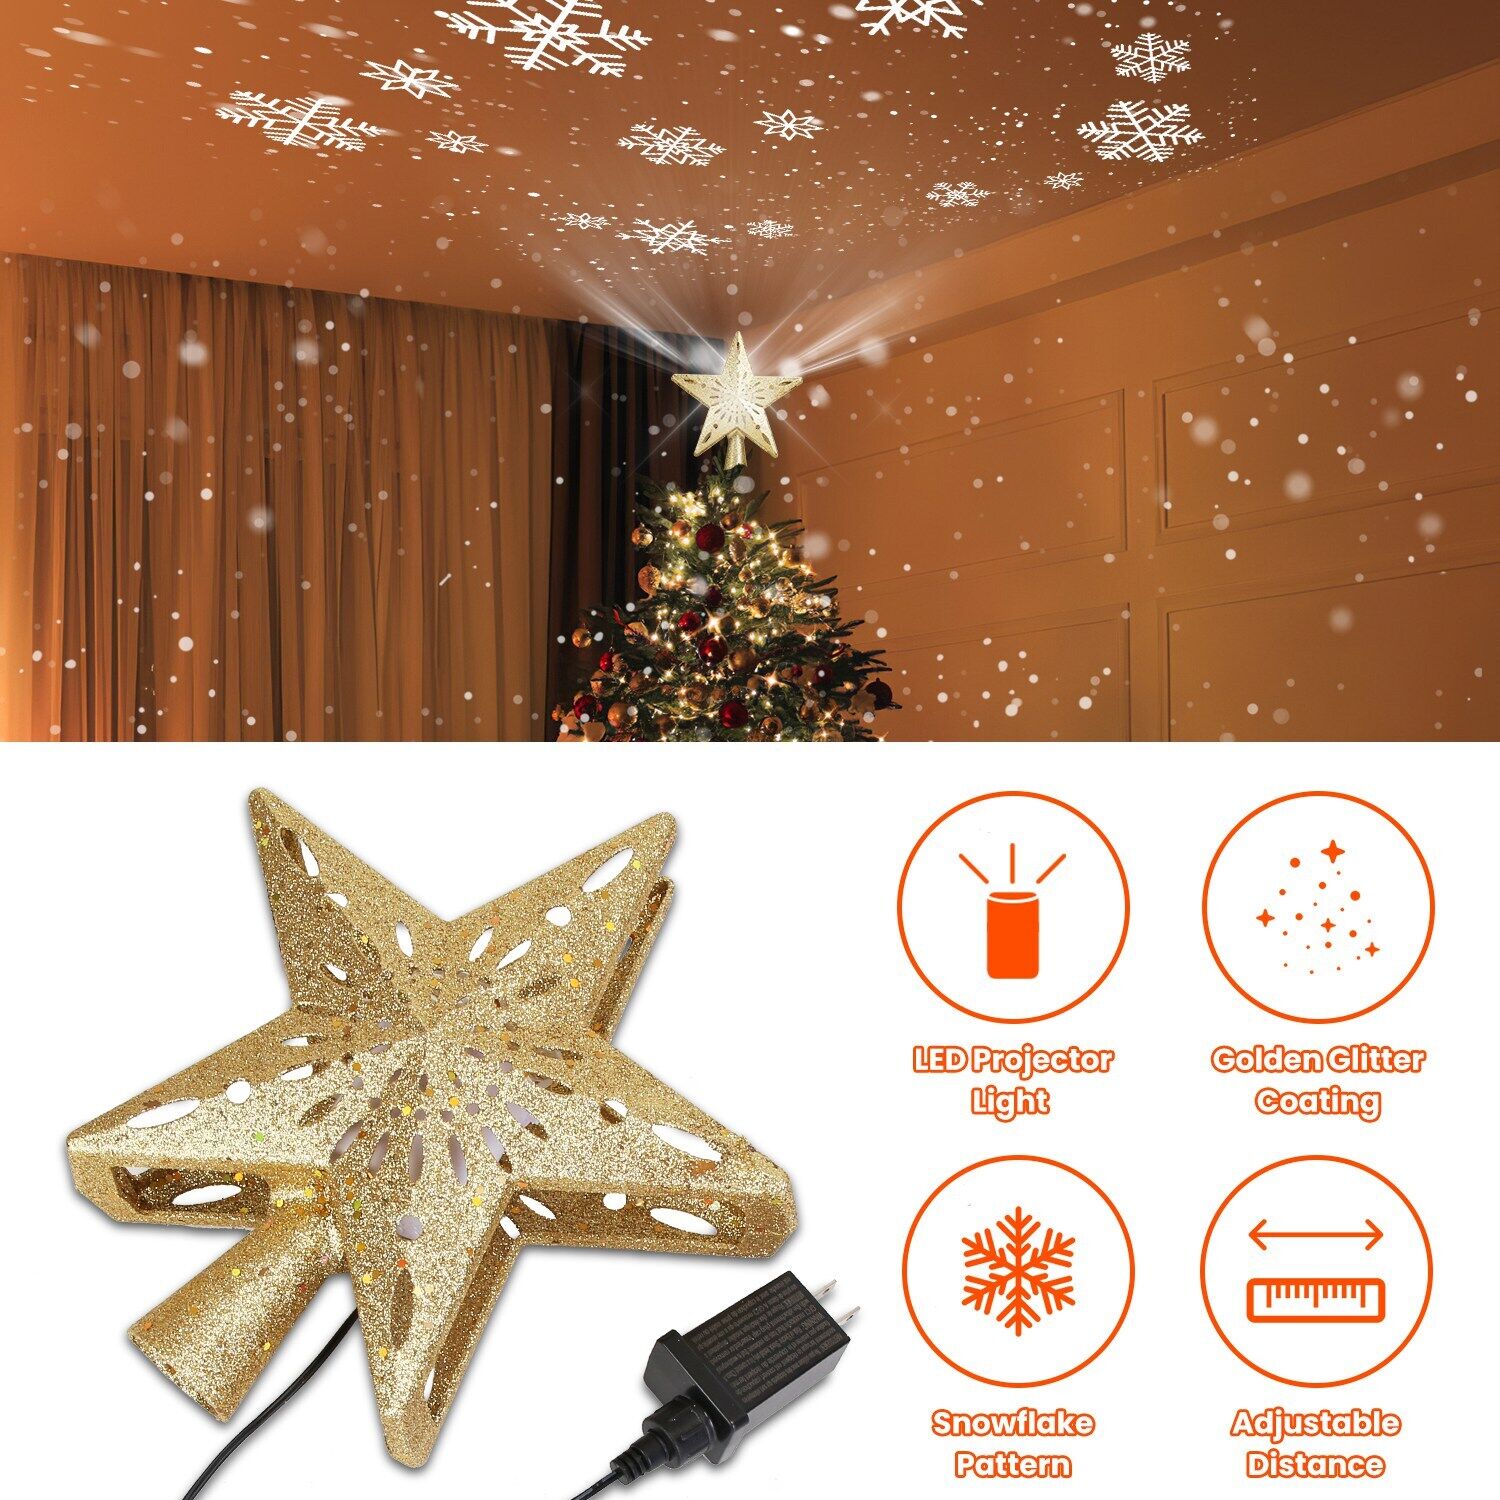 Christmas Star Tree Topper w/ LED Projector Light For Christmas Tree Decoration